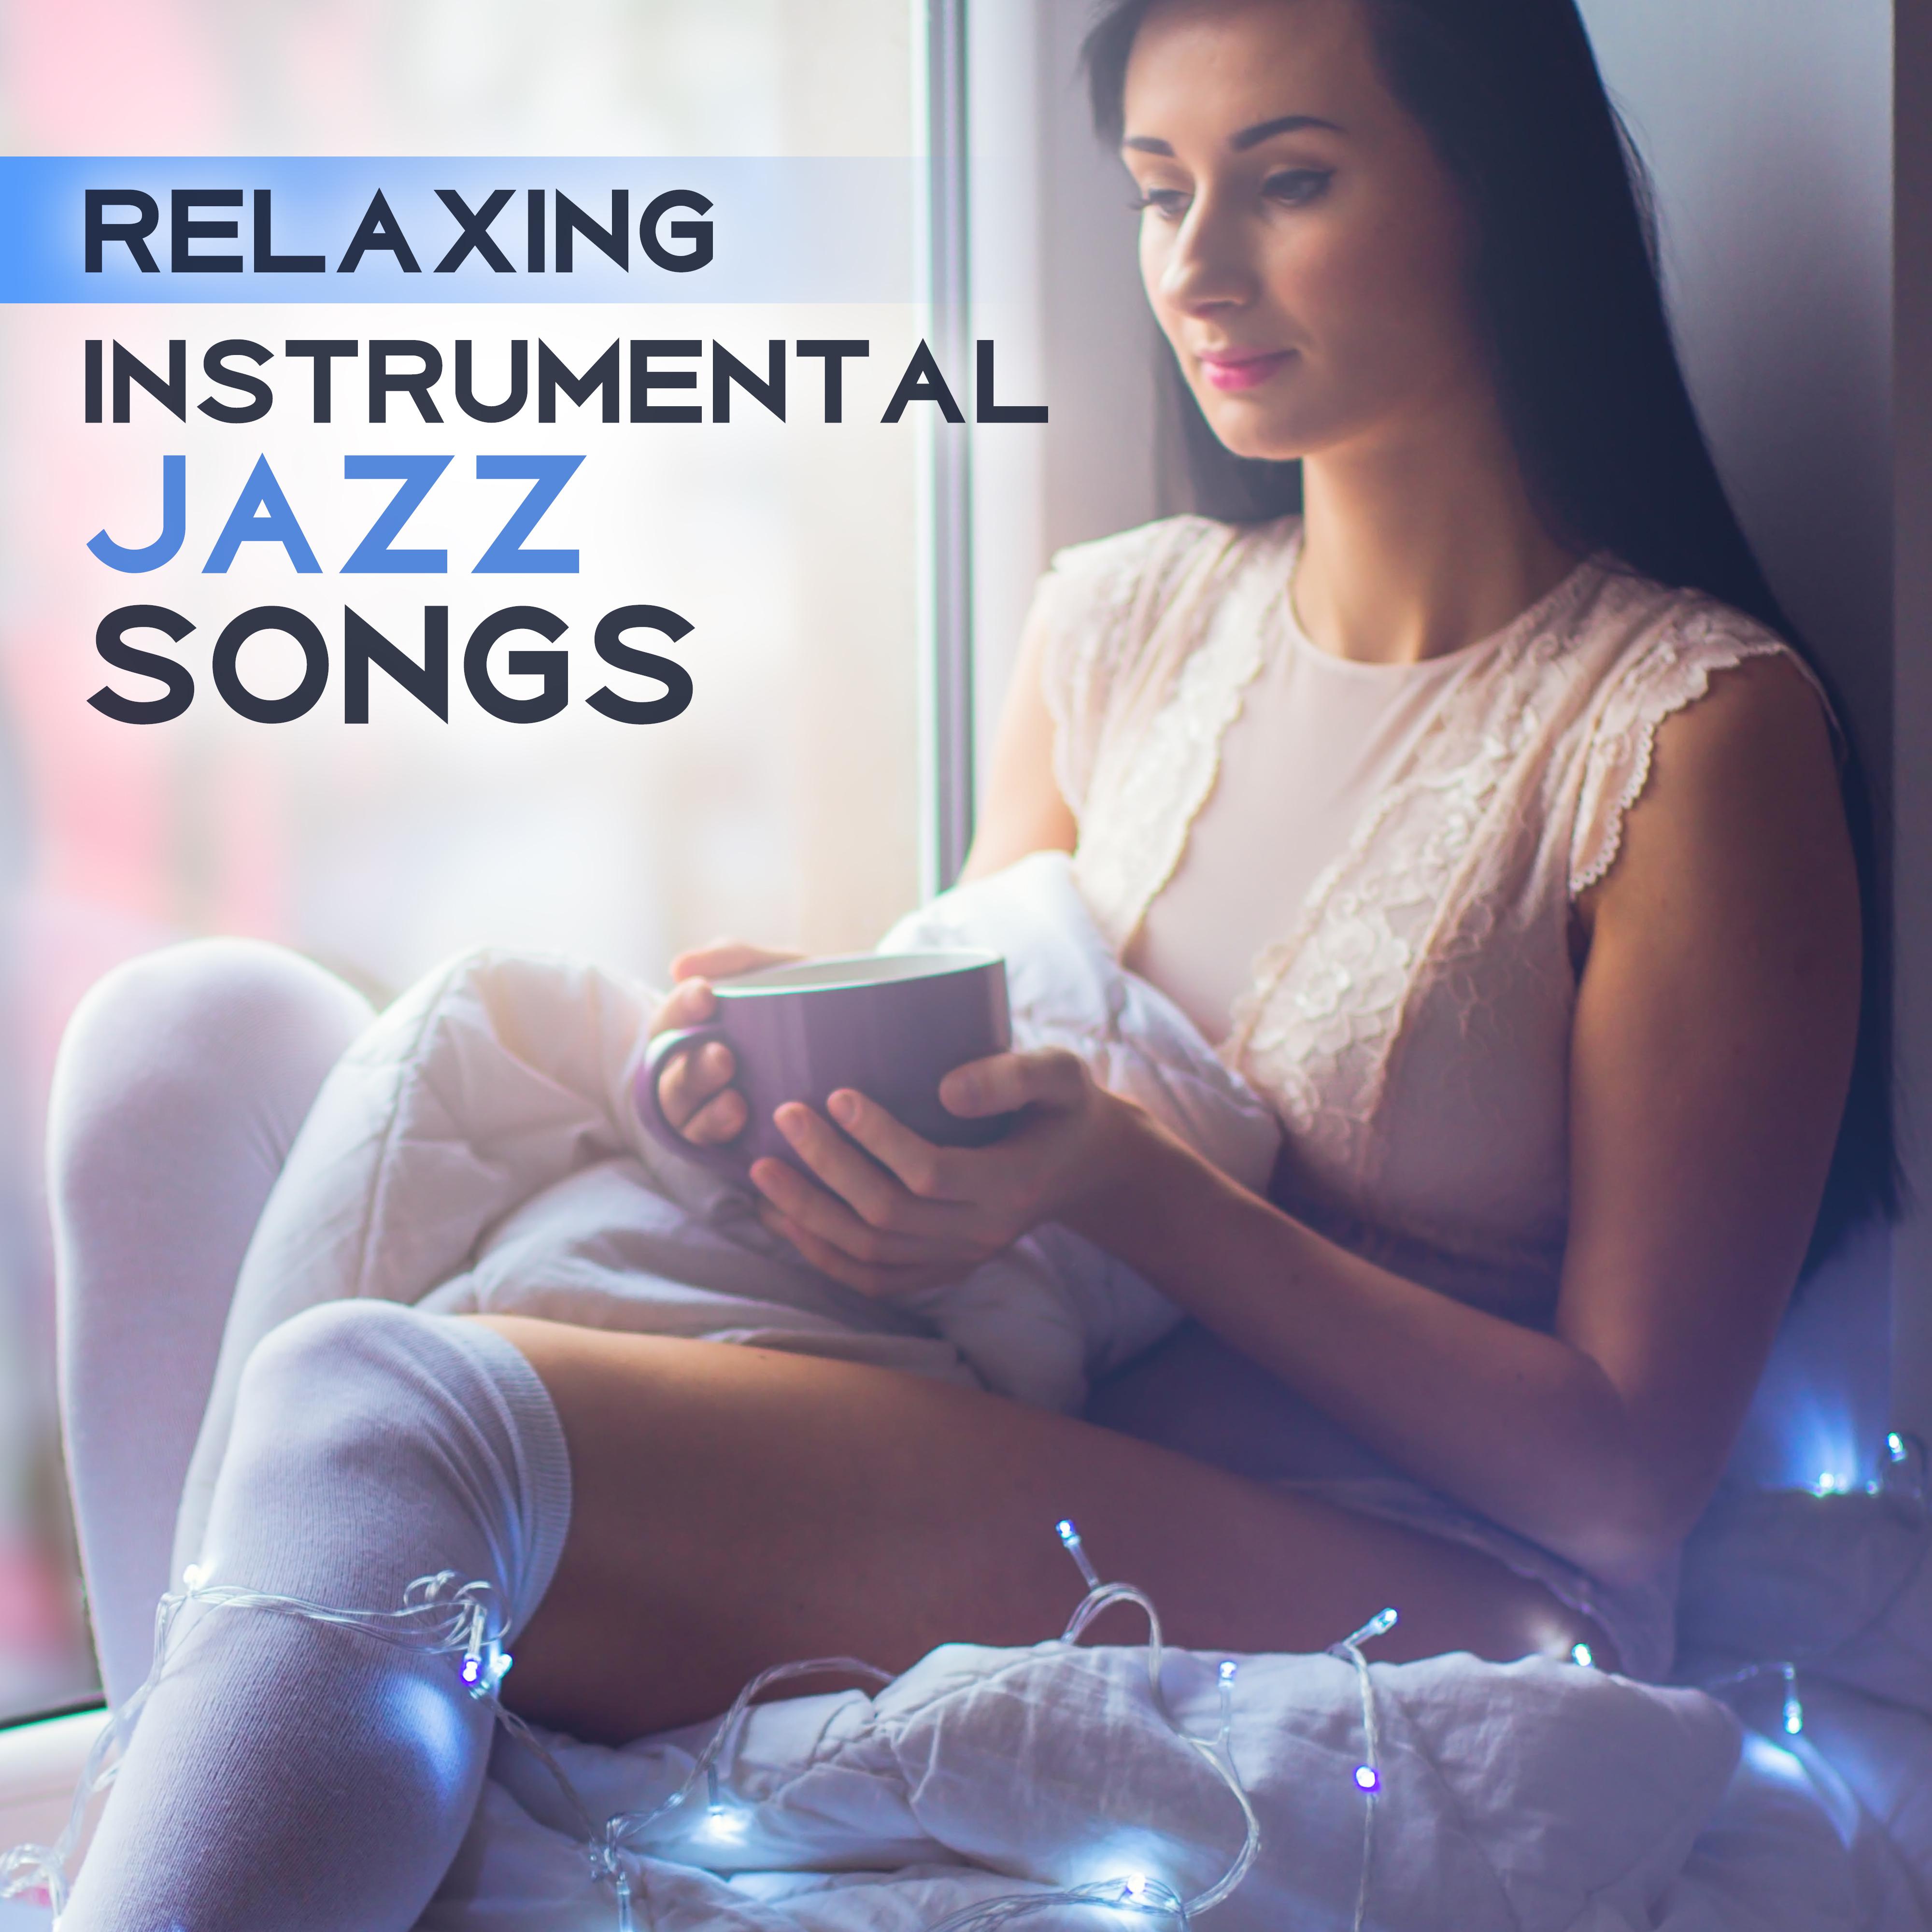 Relaxing Instrumental Jazz Songs – The Best Background Jazz for Restaurant, Coffee Rest, Stress Relief